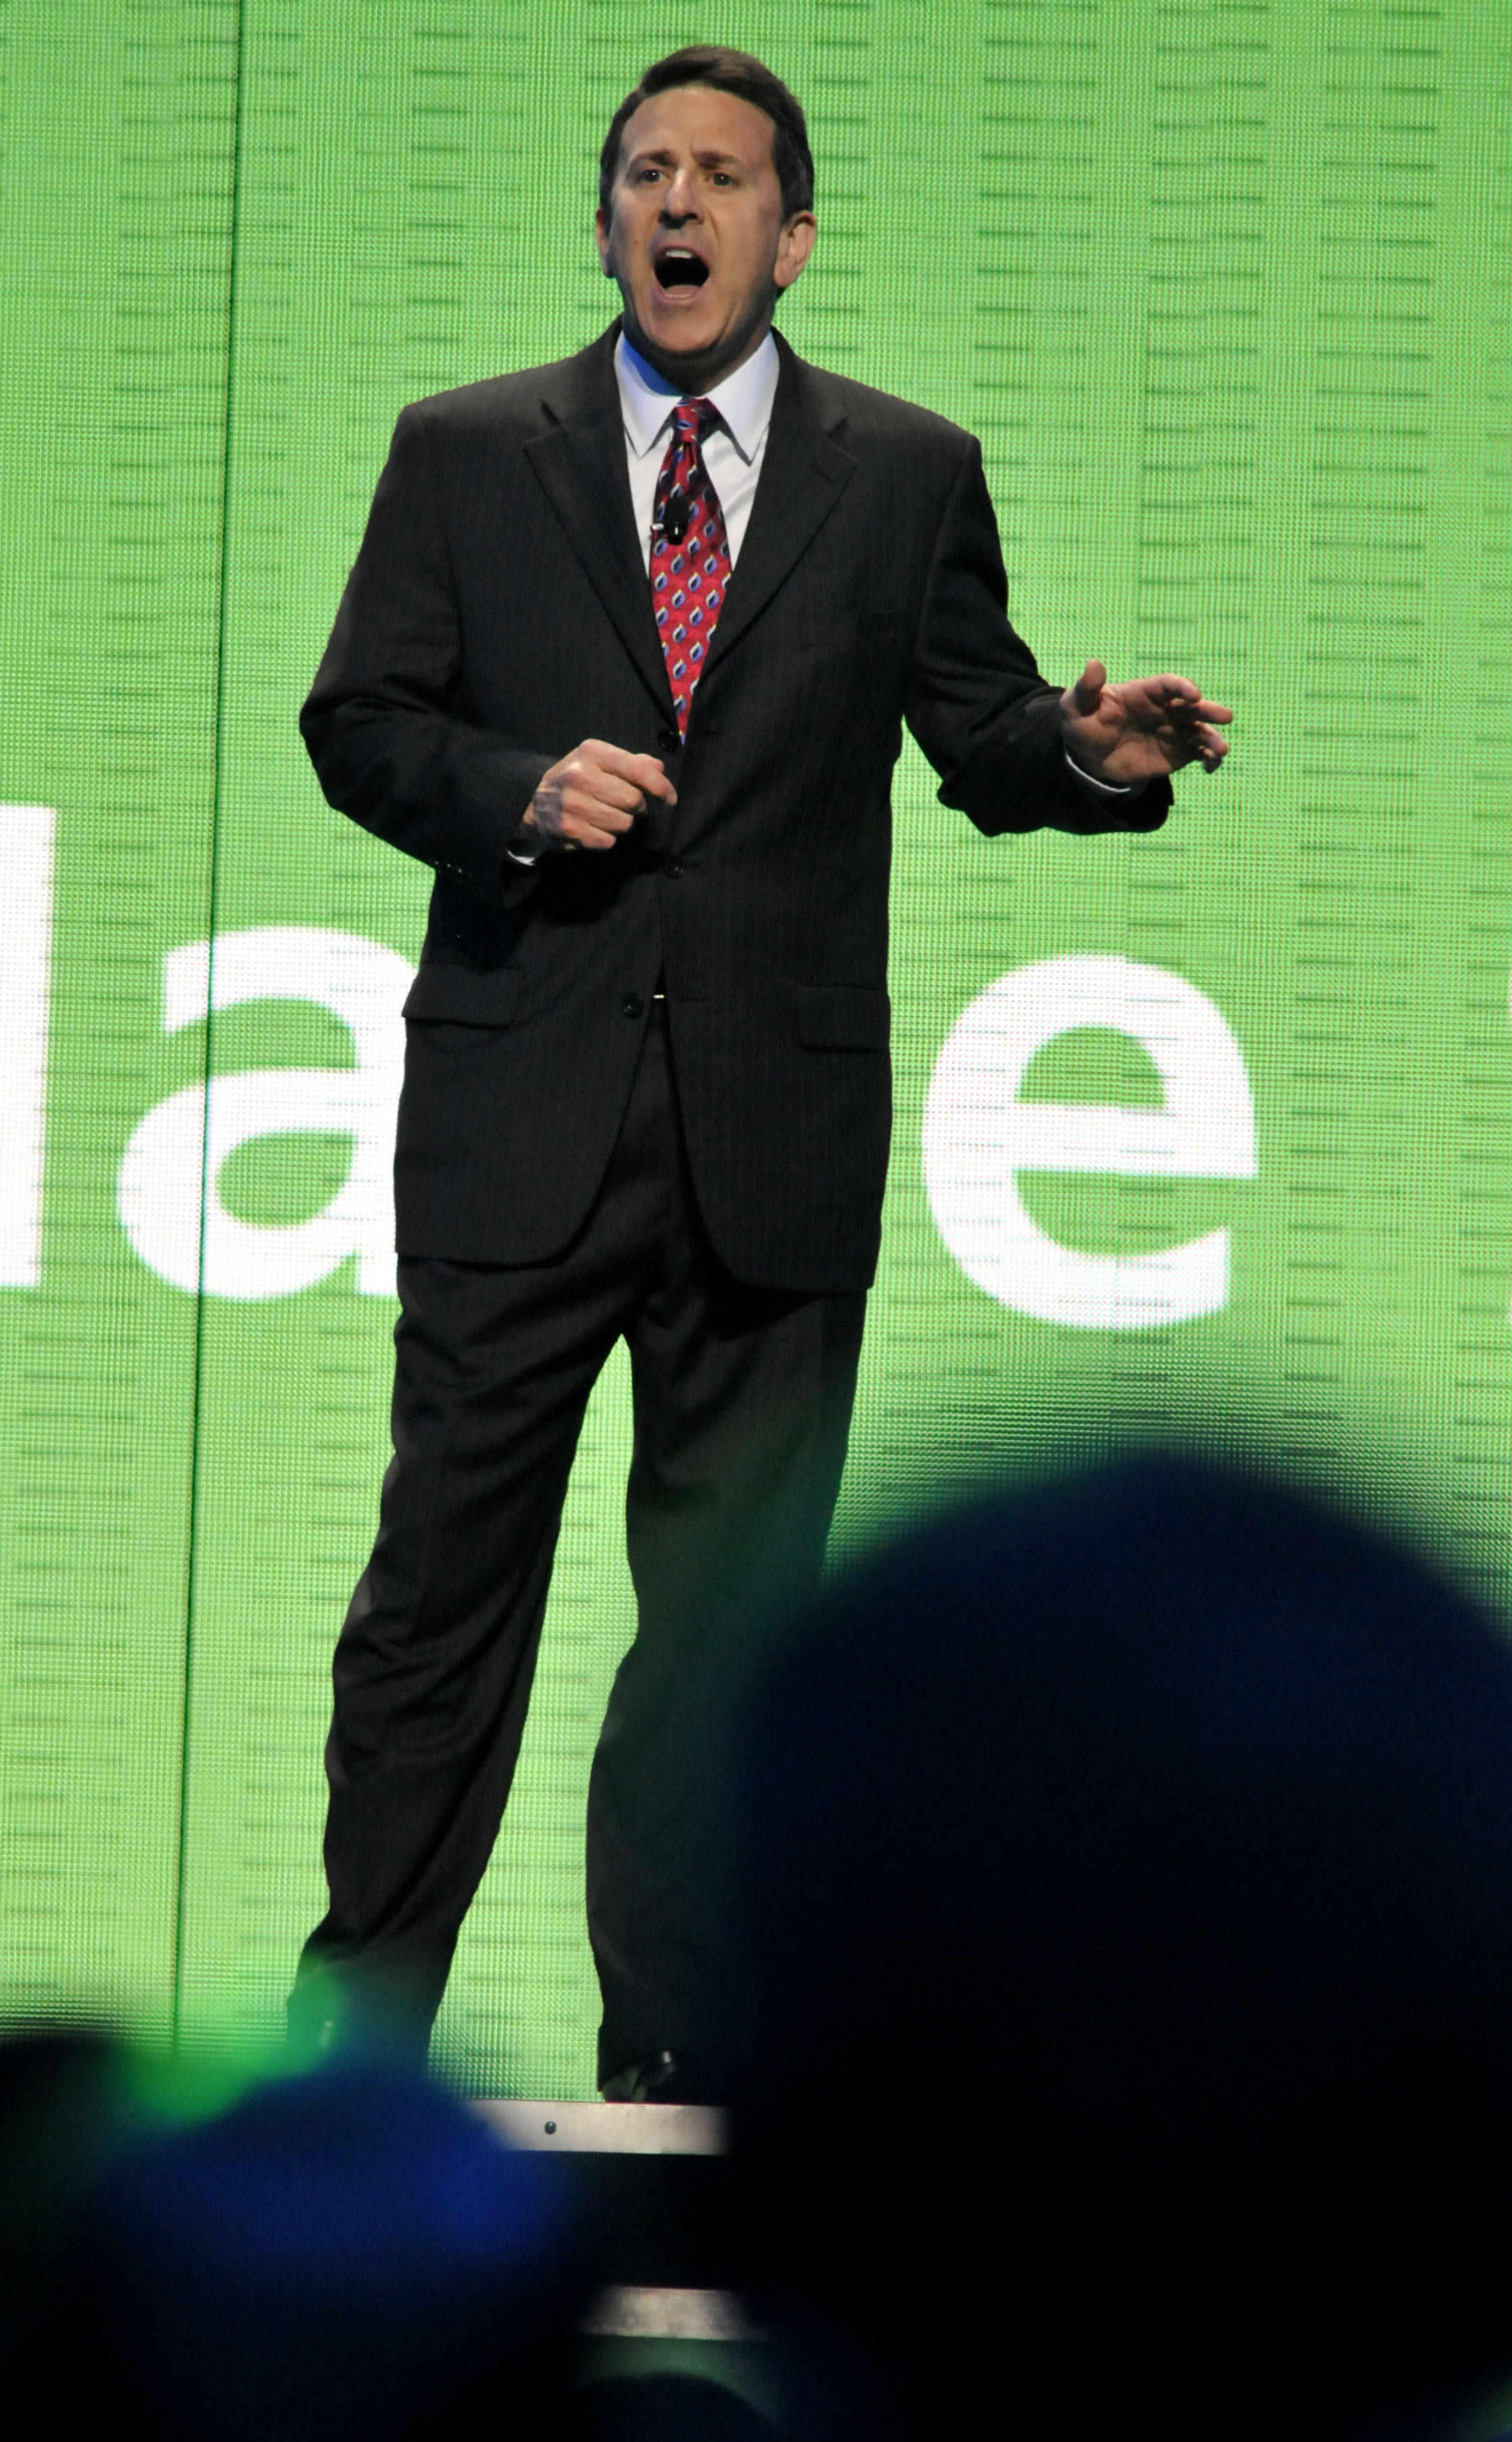 Brian Cornell, then president and CEO of Sam's Club, speaks during the Wal-Mart Stores Inc. shareholders' meeting in Fayetteville, Ark., in this June 4, 2010 file photo. (April L. Brown—AP)